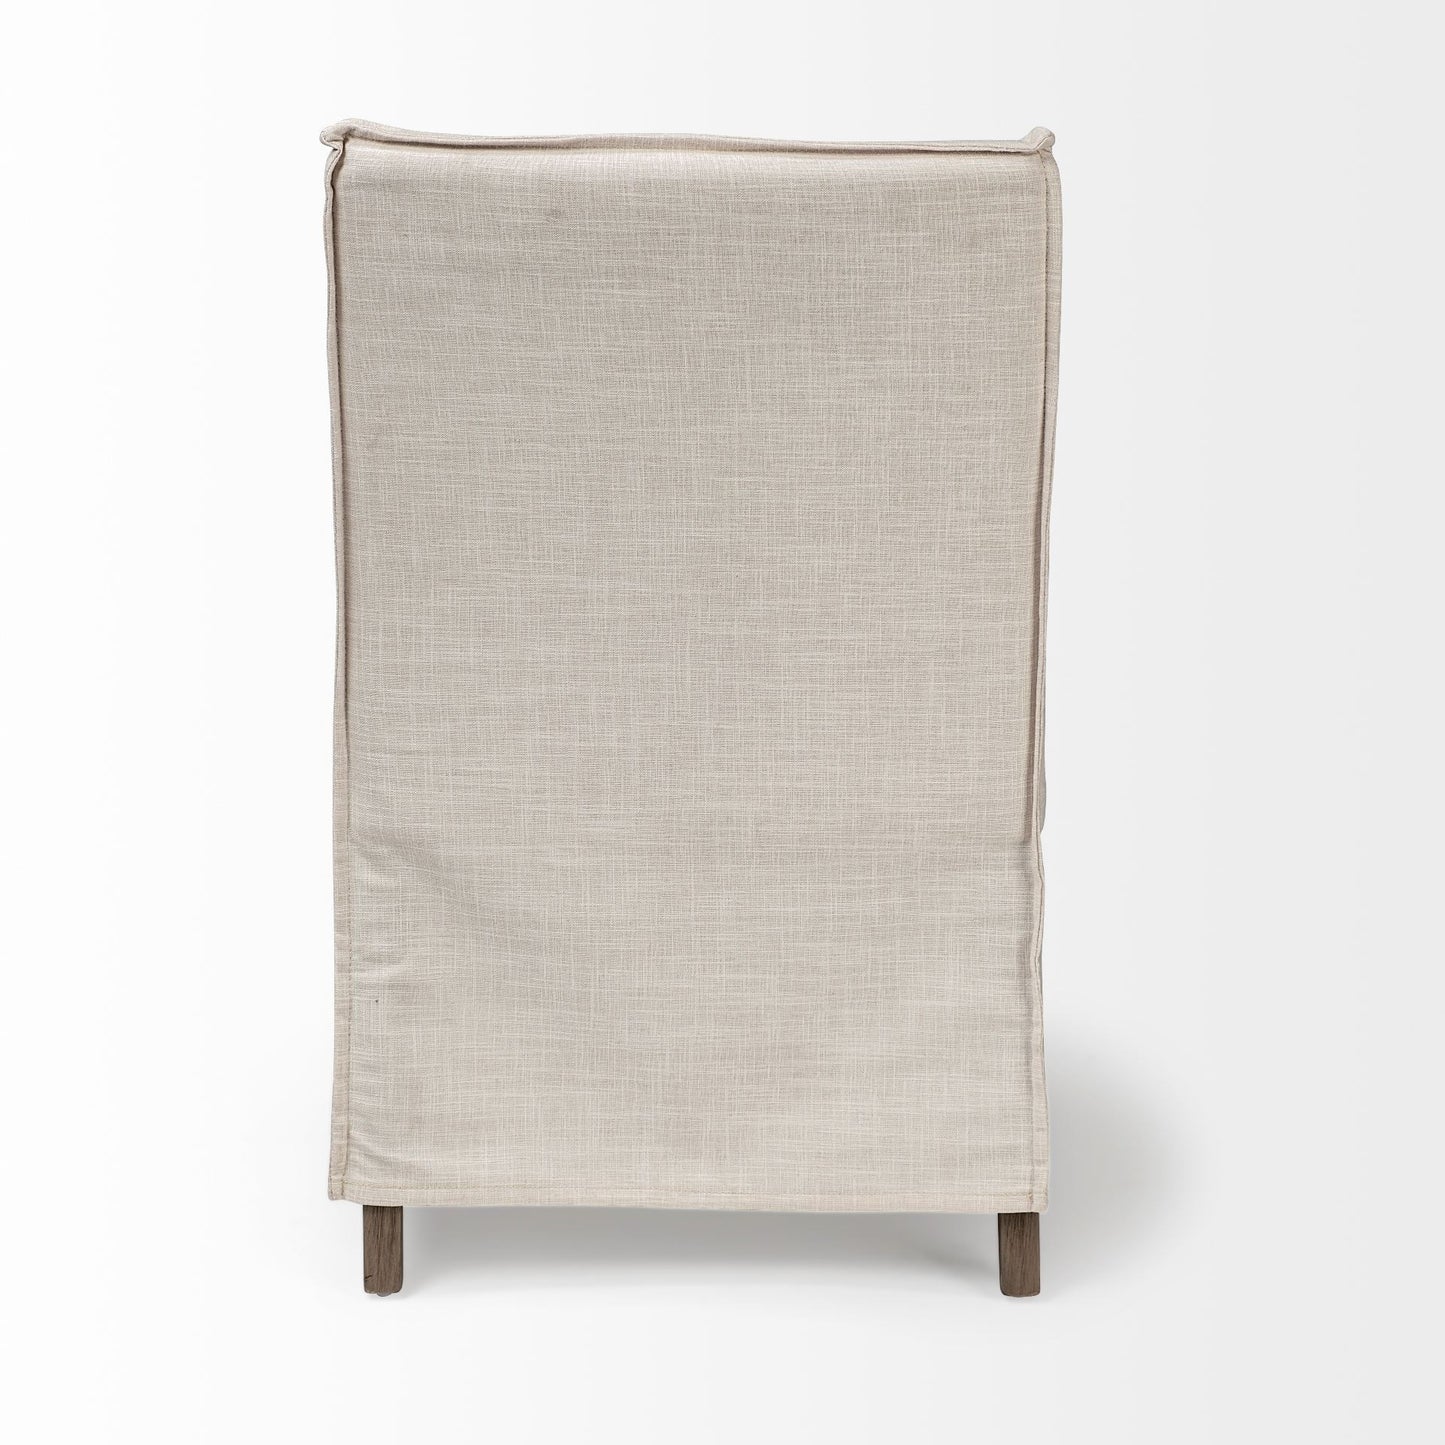 Cream Fabric Slip Cover With Brown Wood Frame Dining Chair